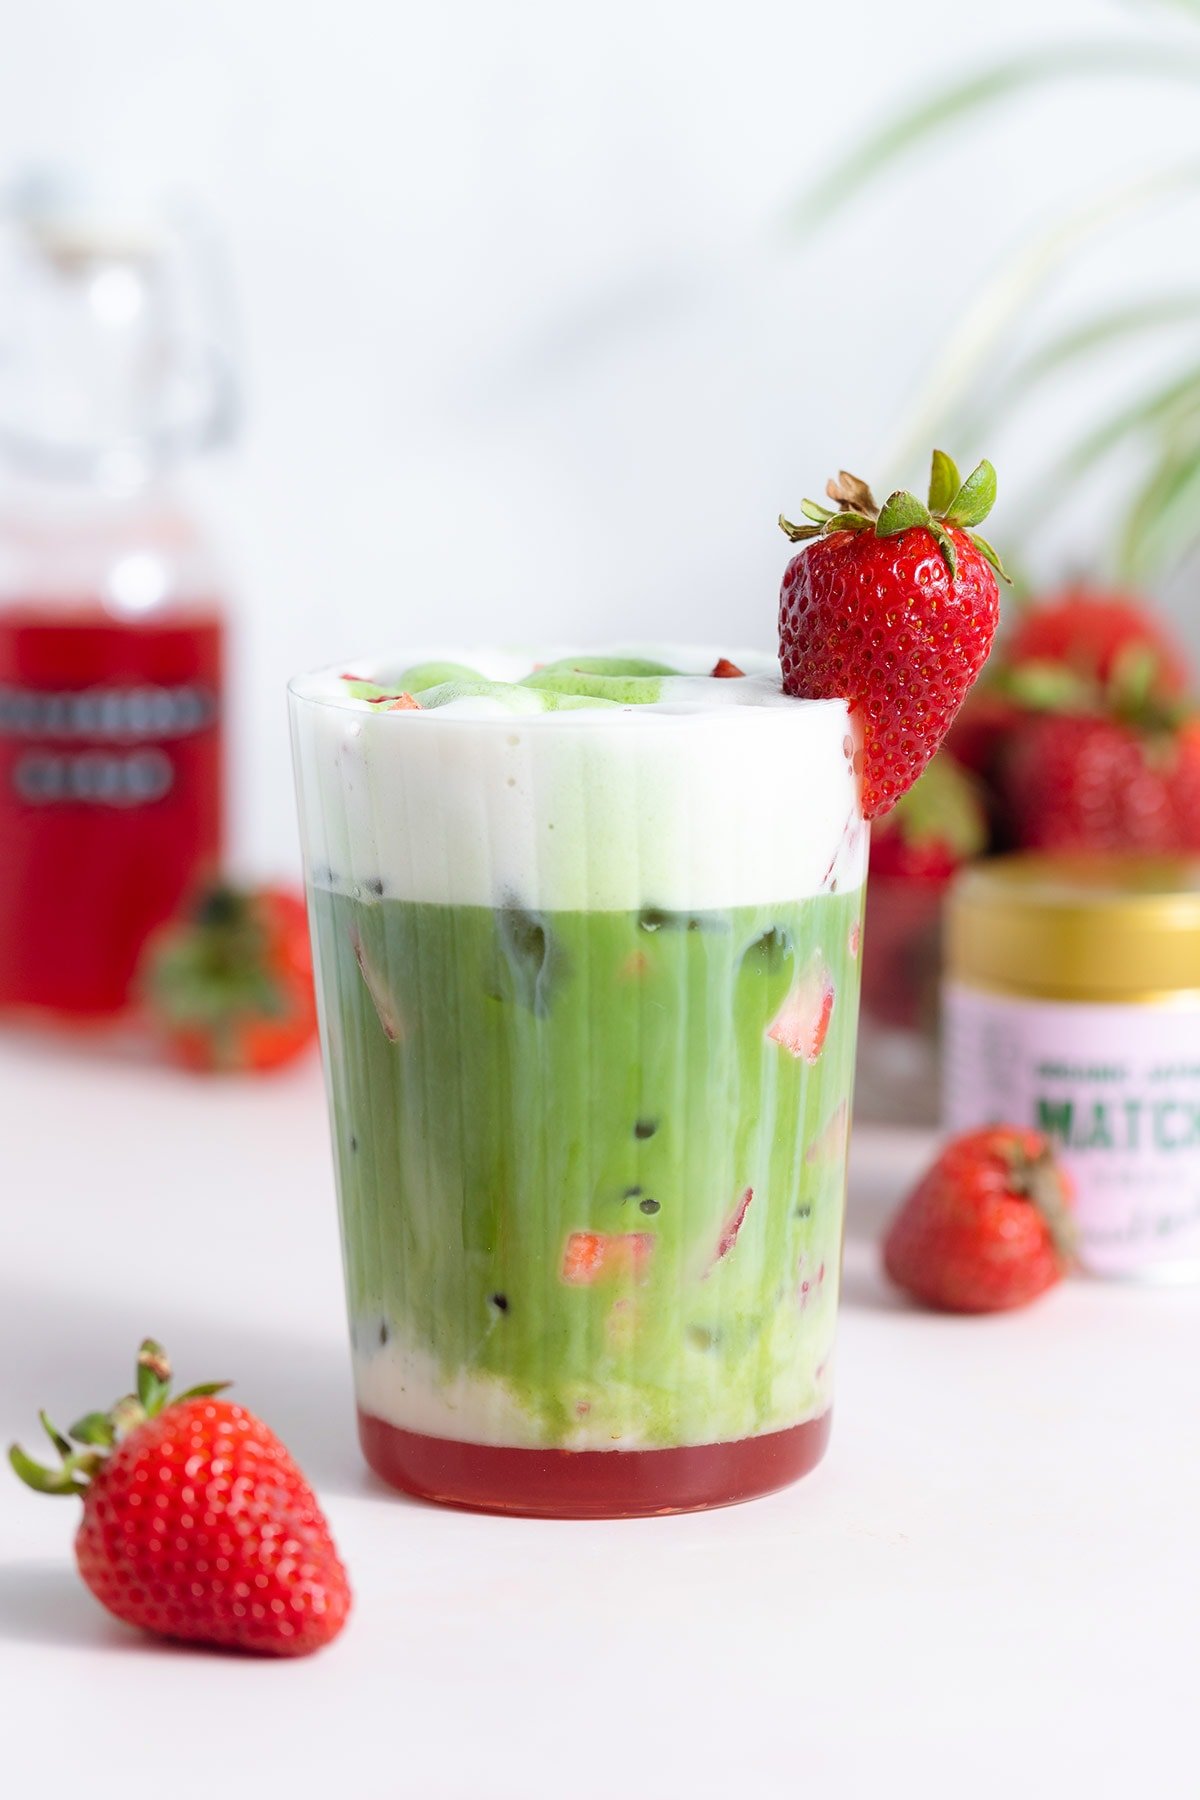 A tall glass with a matcha latte with a layer of frothy milk on the top and a layer of strawberry syrup on the bottom of the glass.